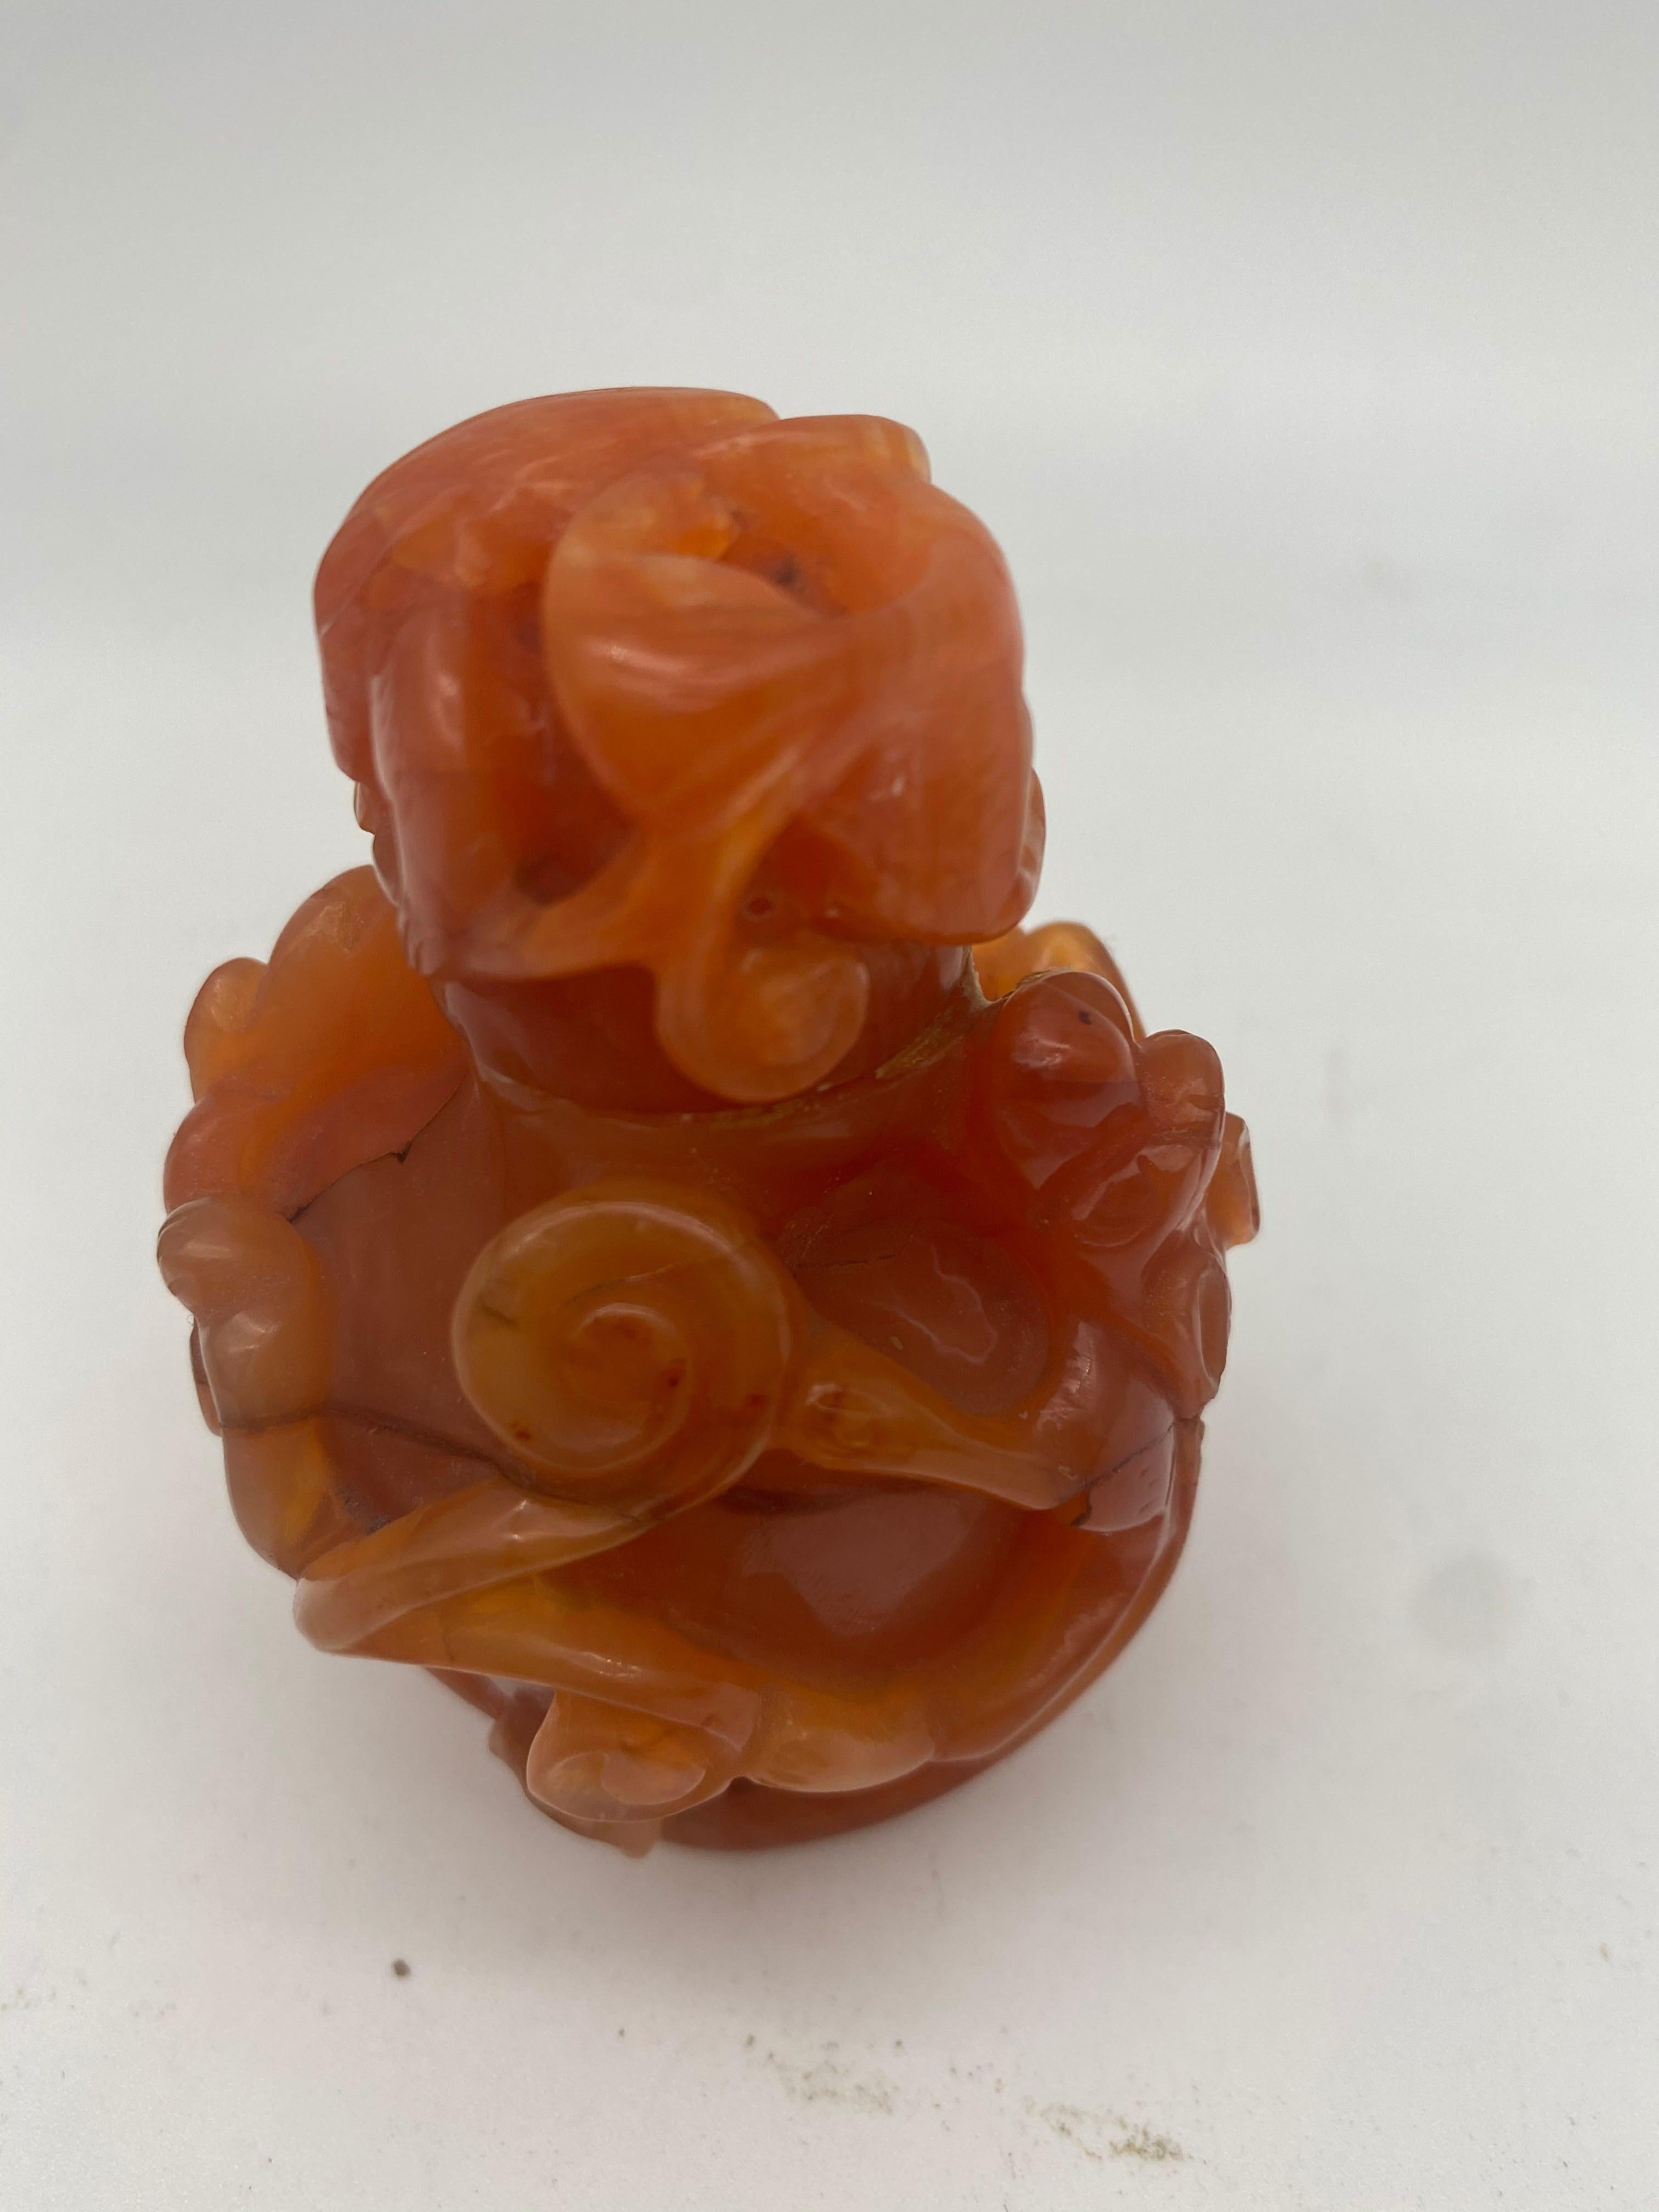 Antique 19th century Chinese agate bottle with lid with Chi dragons, decorated in the form of a flower diameter 5 cm, high 8 cm.